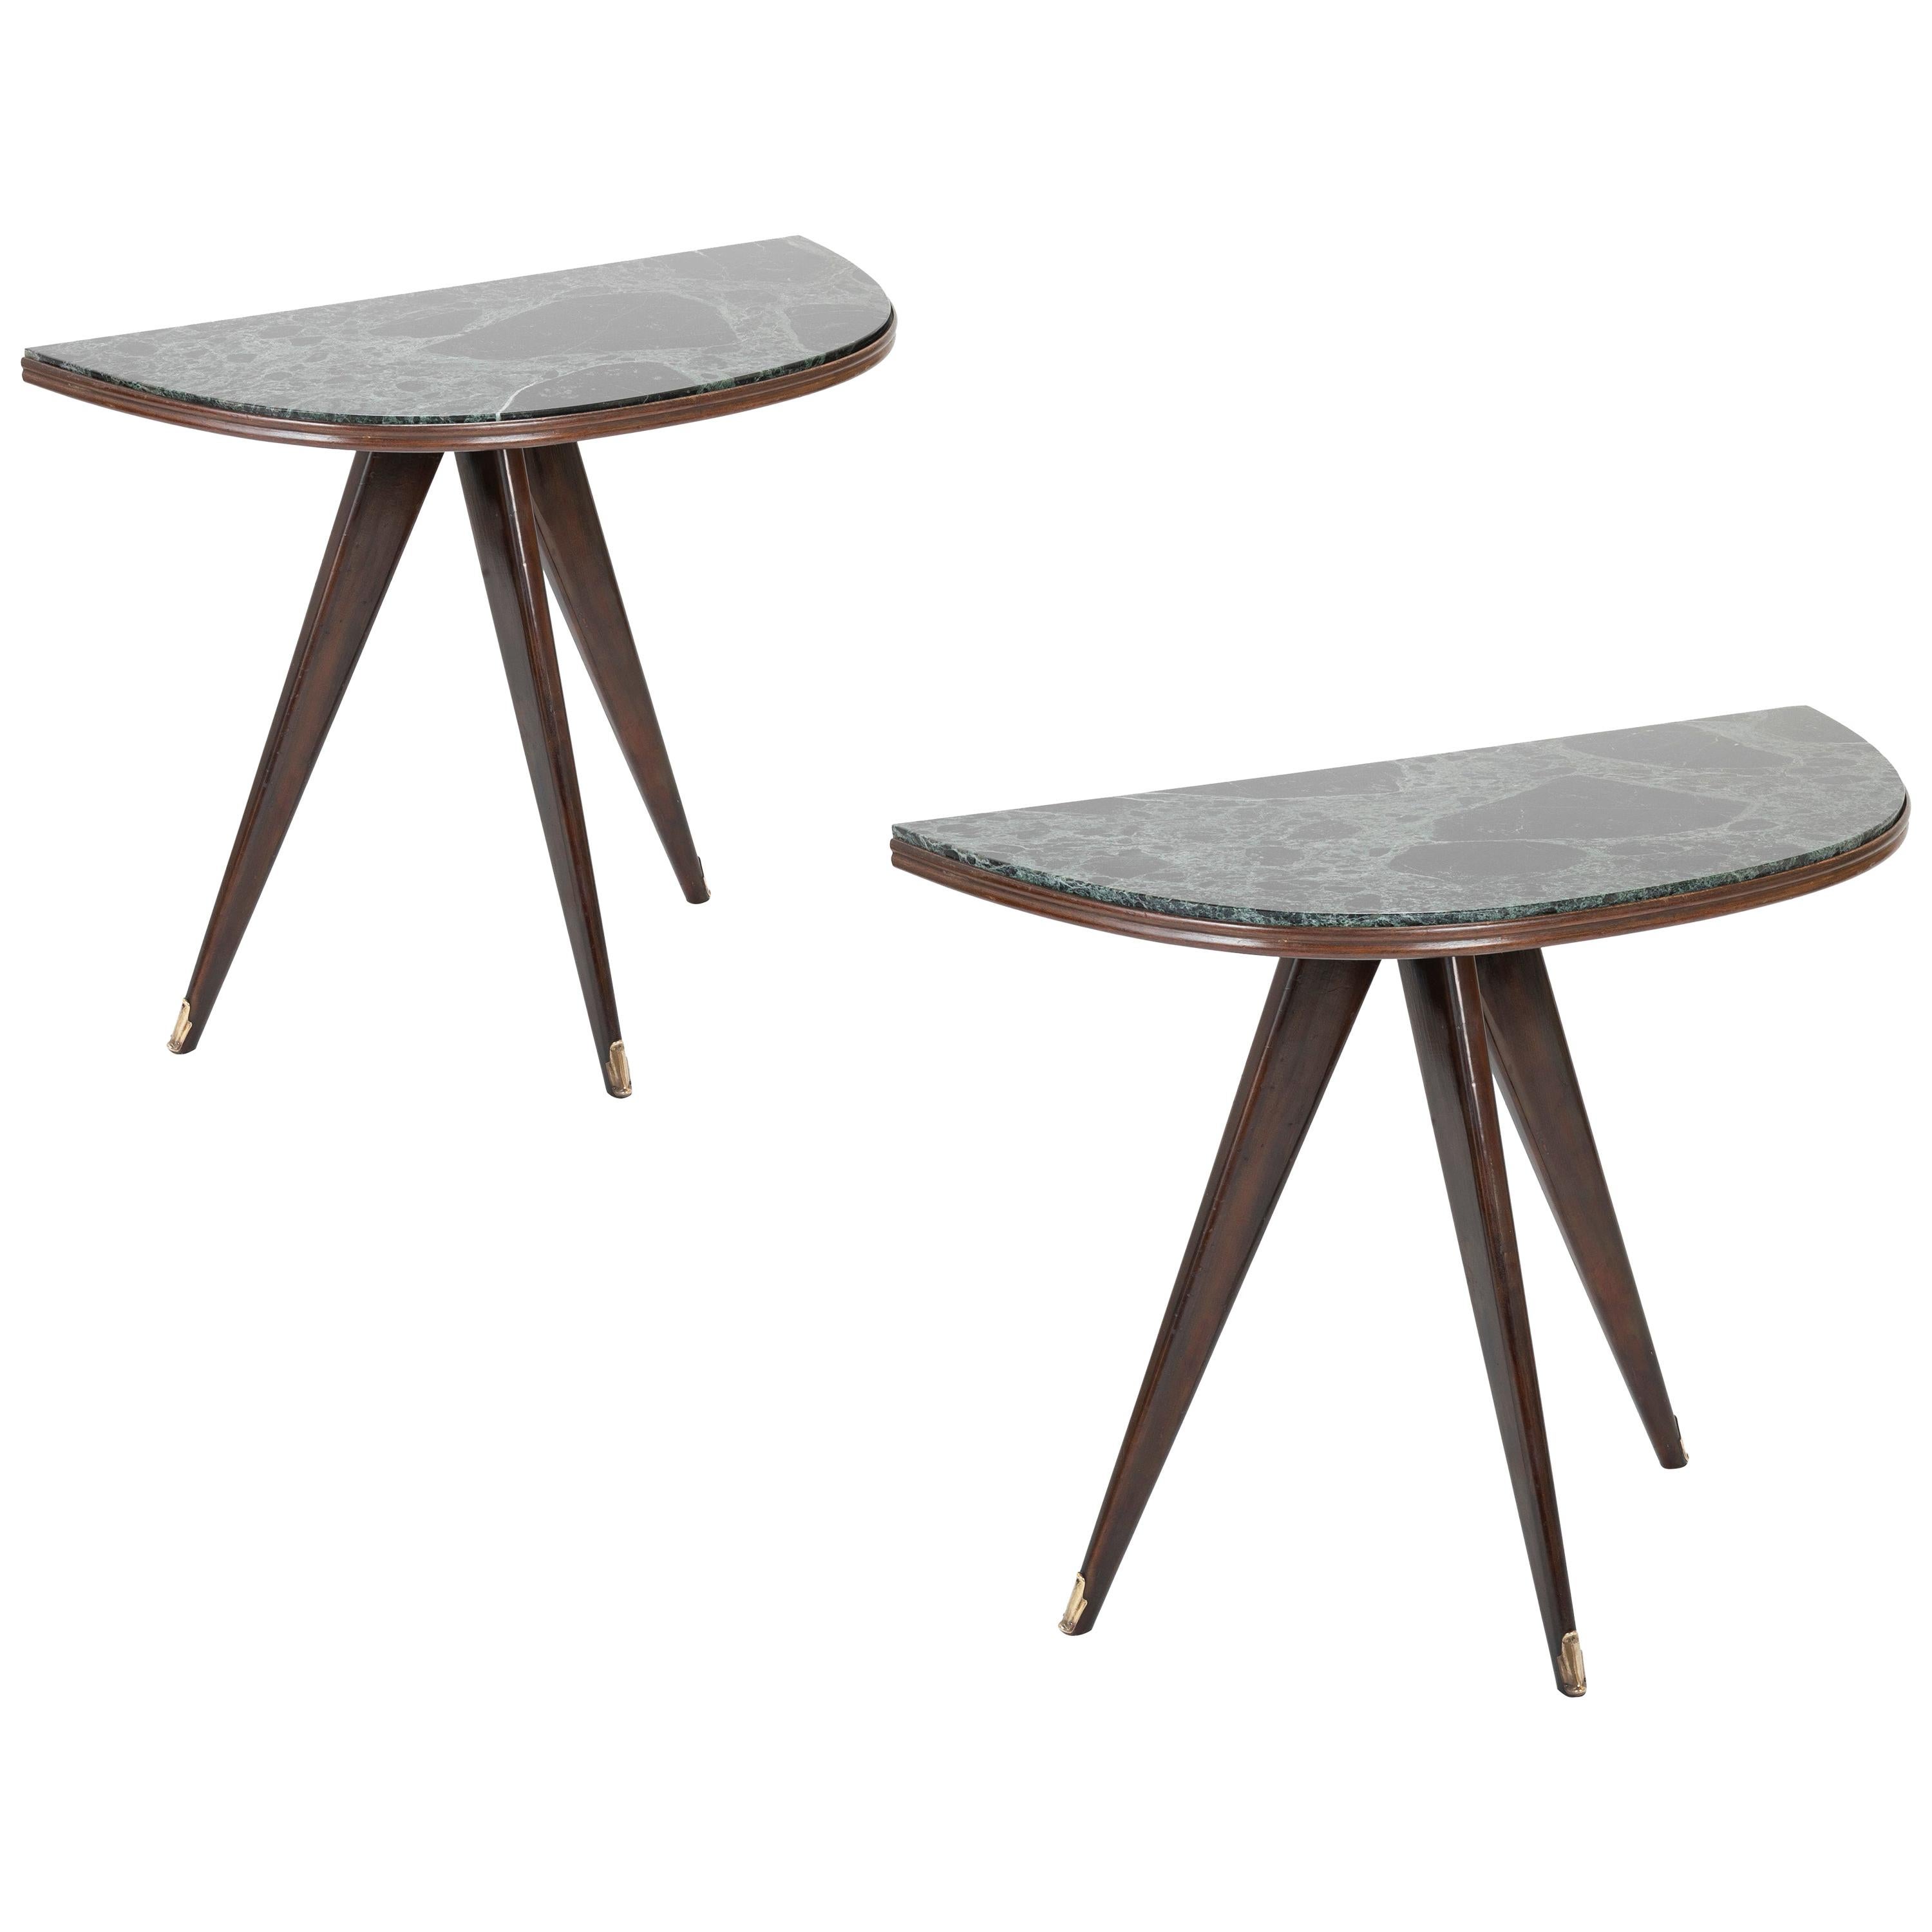 Pair of Midcentury Italian Demilune Tables with Breccia Marble Tops